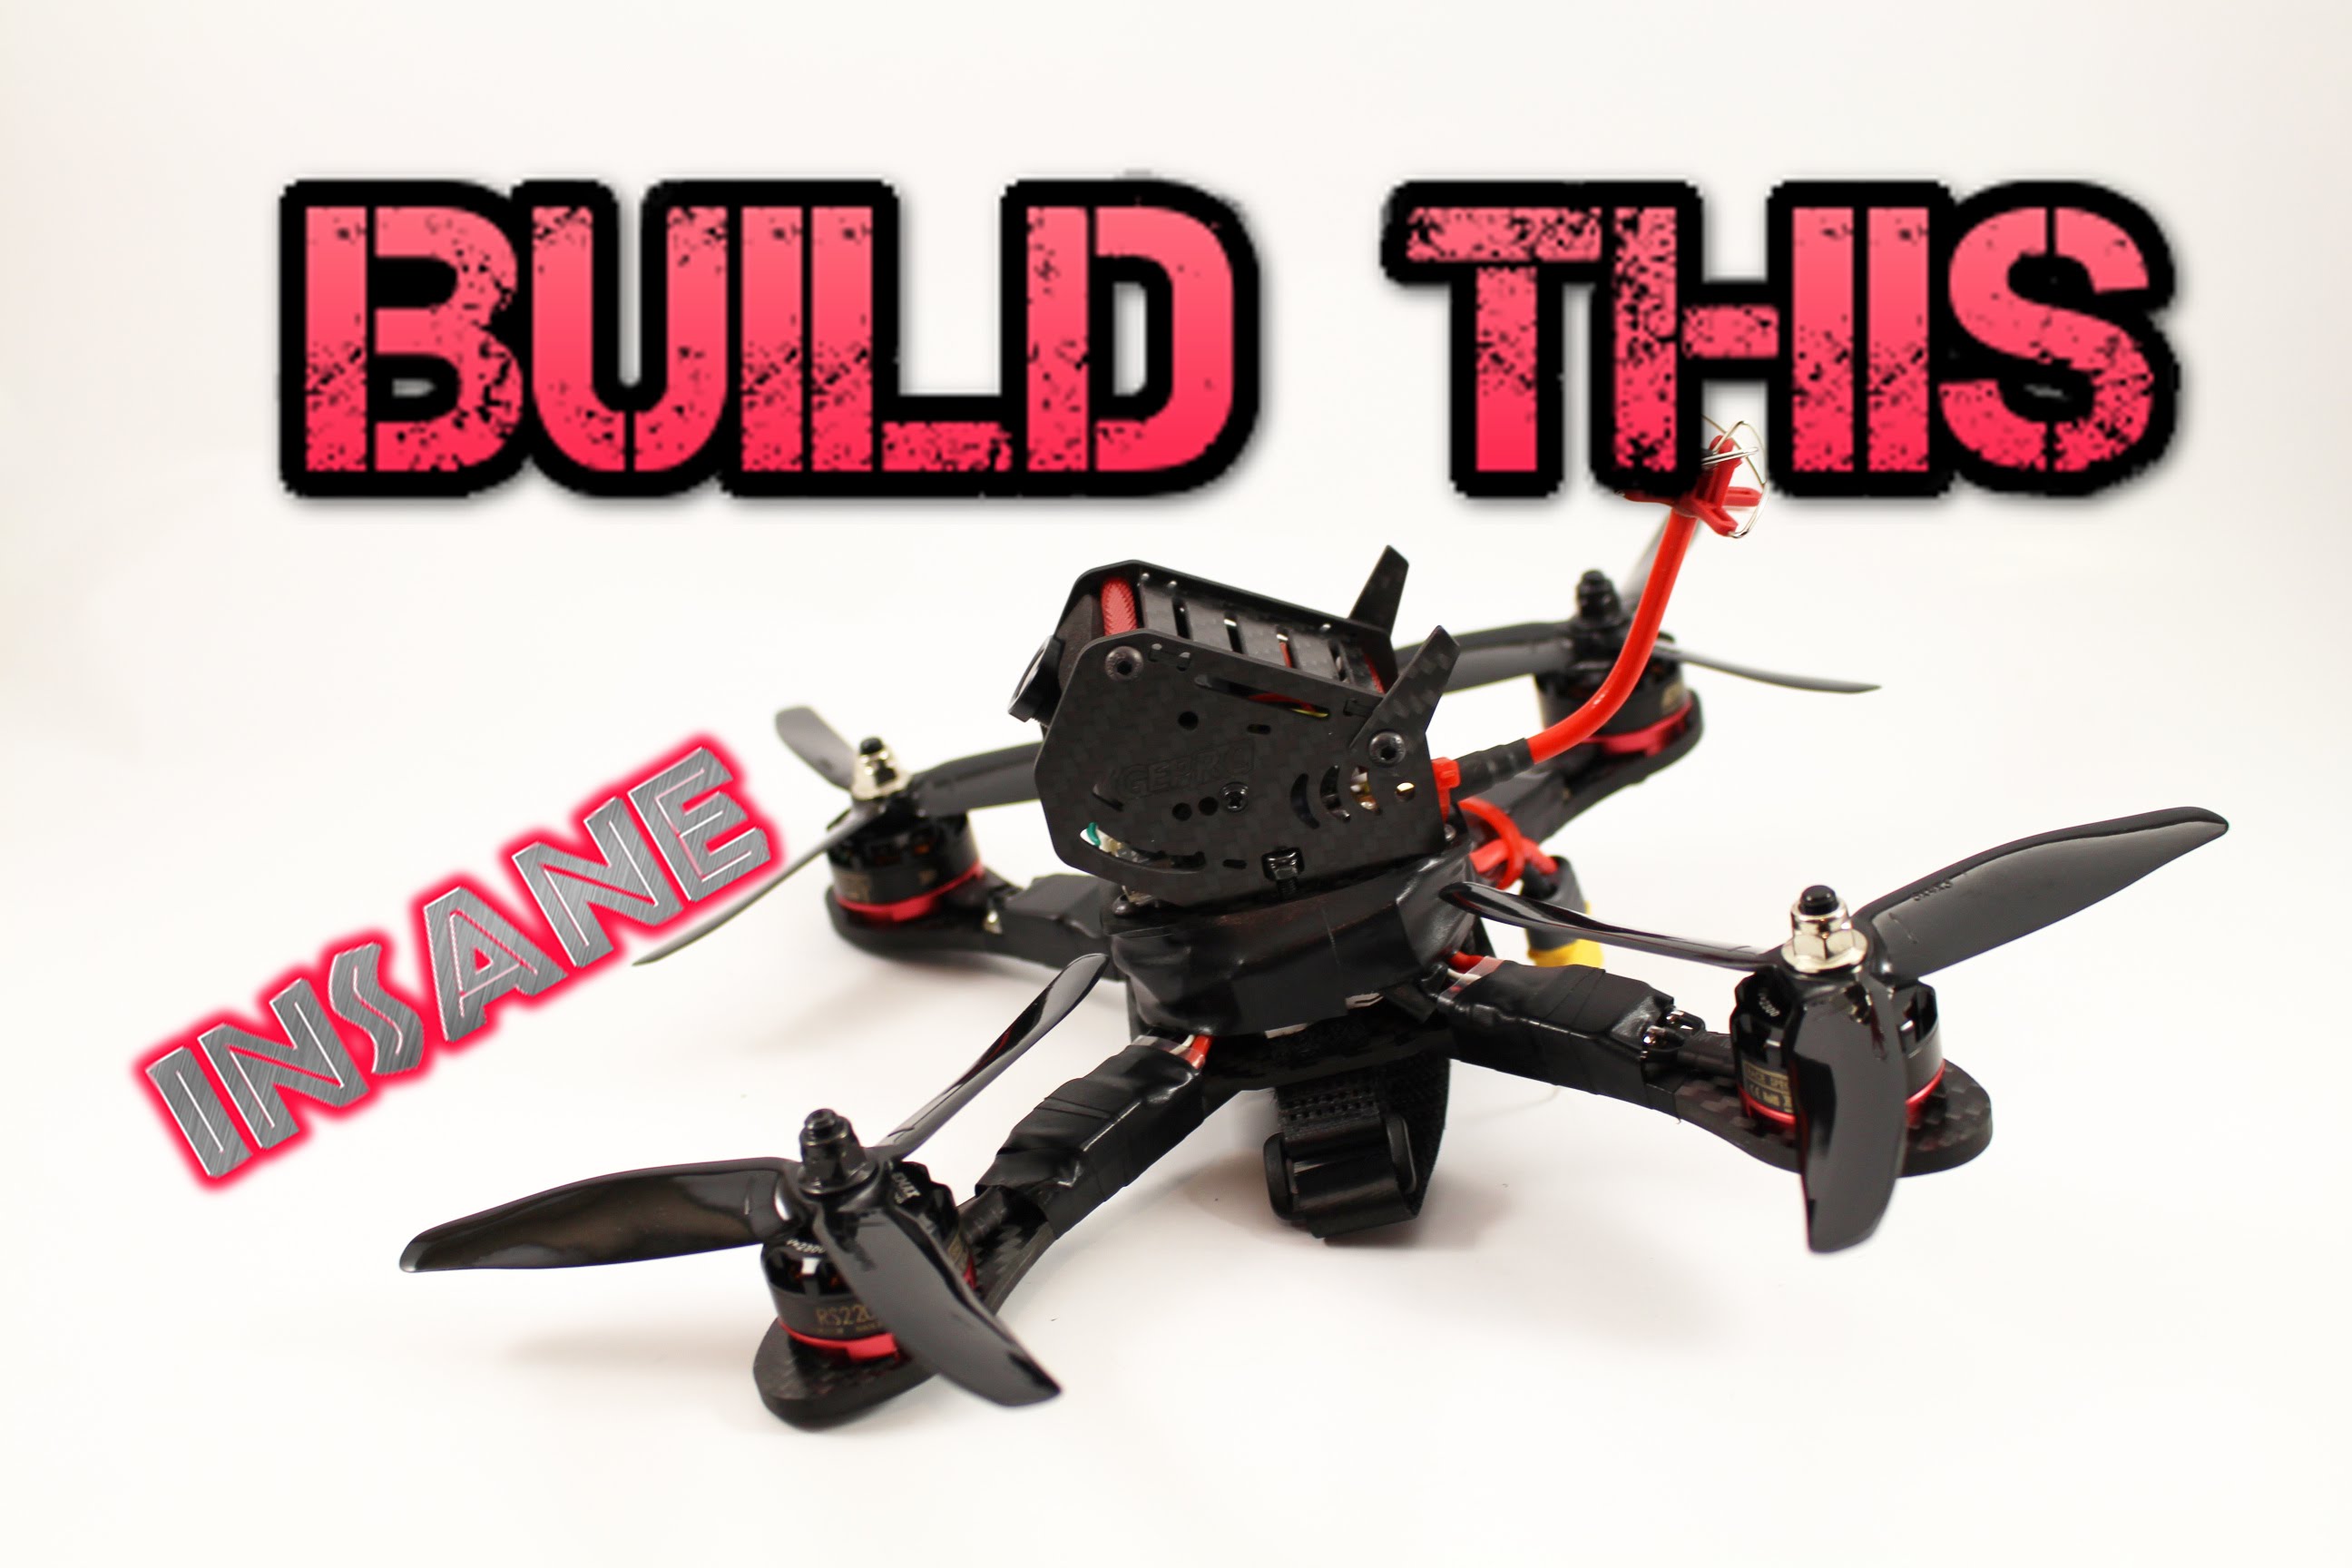 DIY. How to build a Racing dronequadcopter. Full Kit guide GB 190